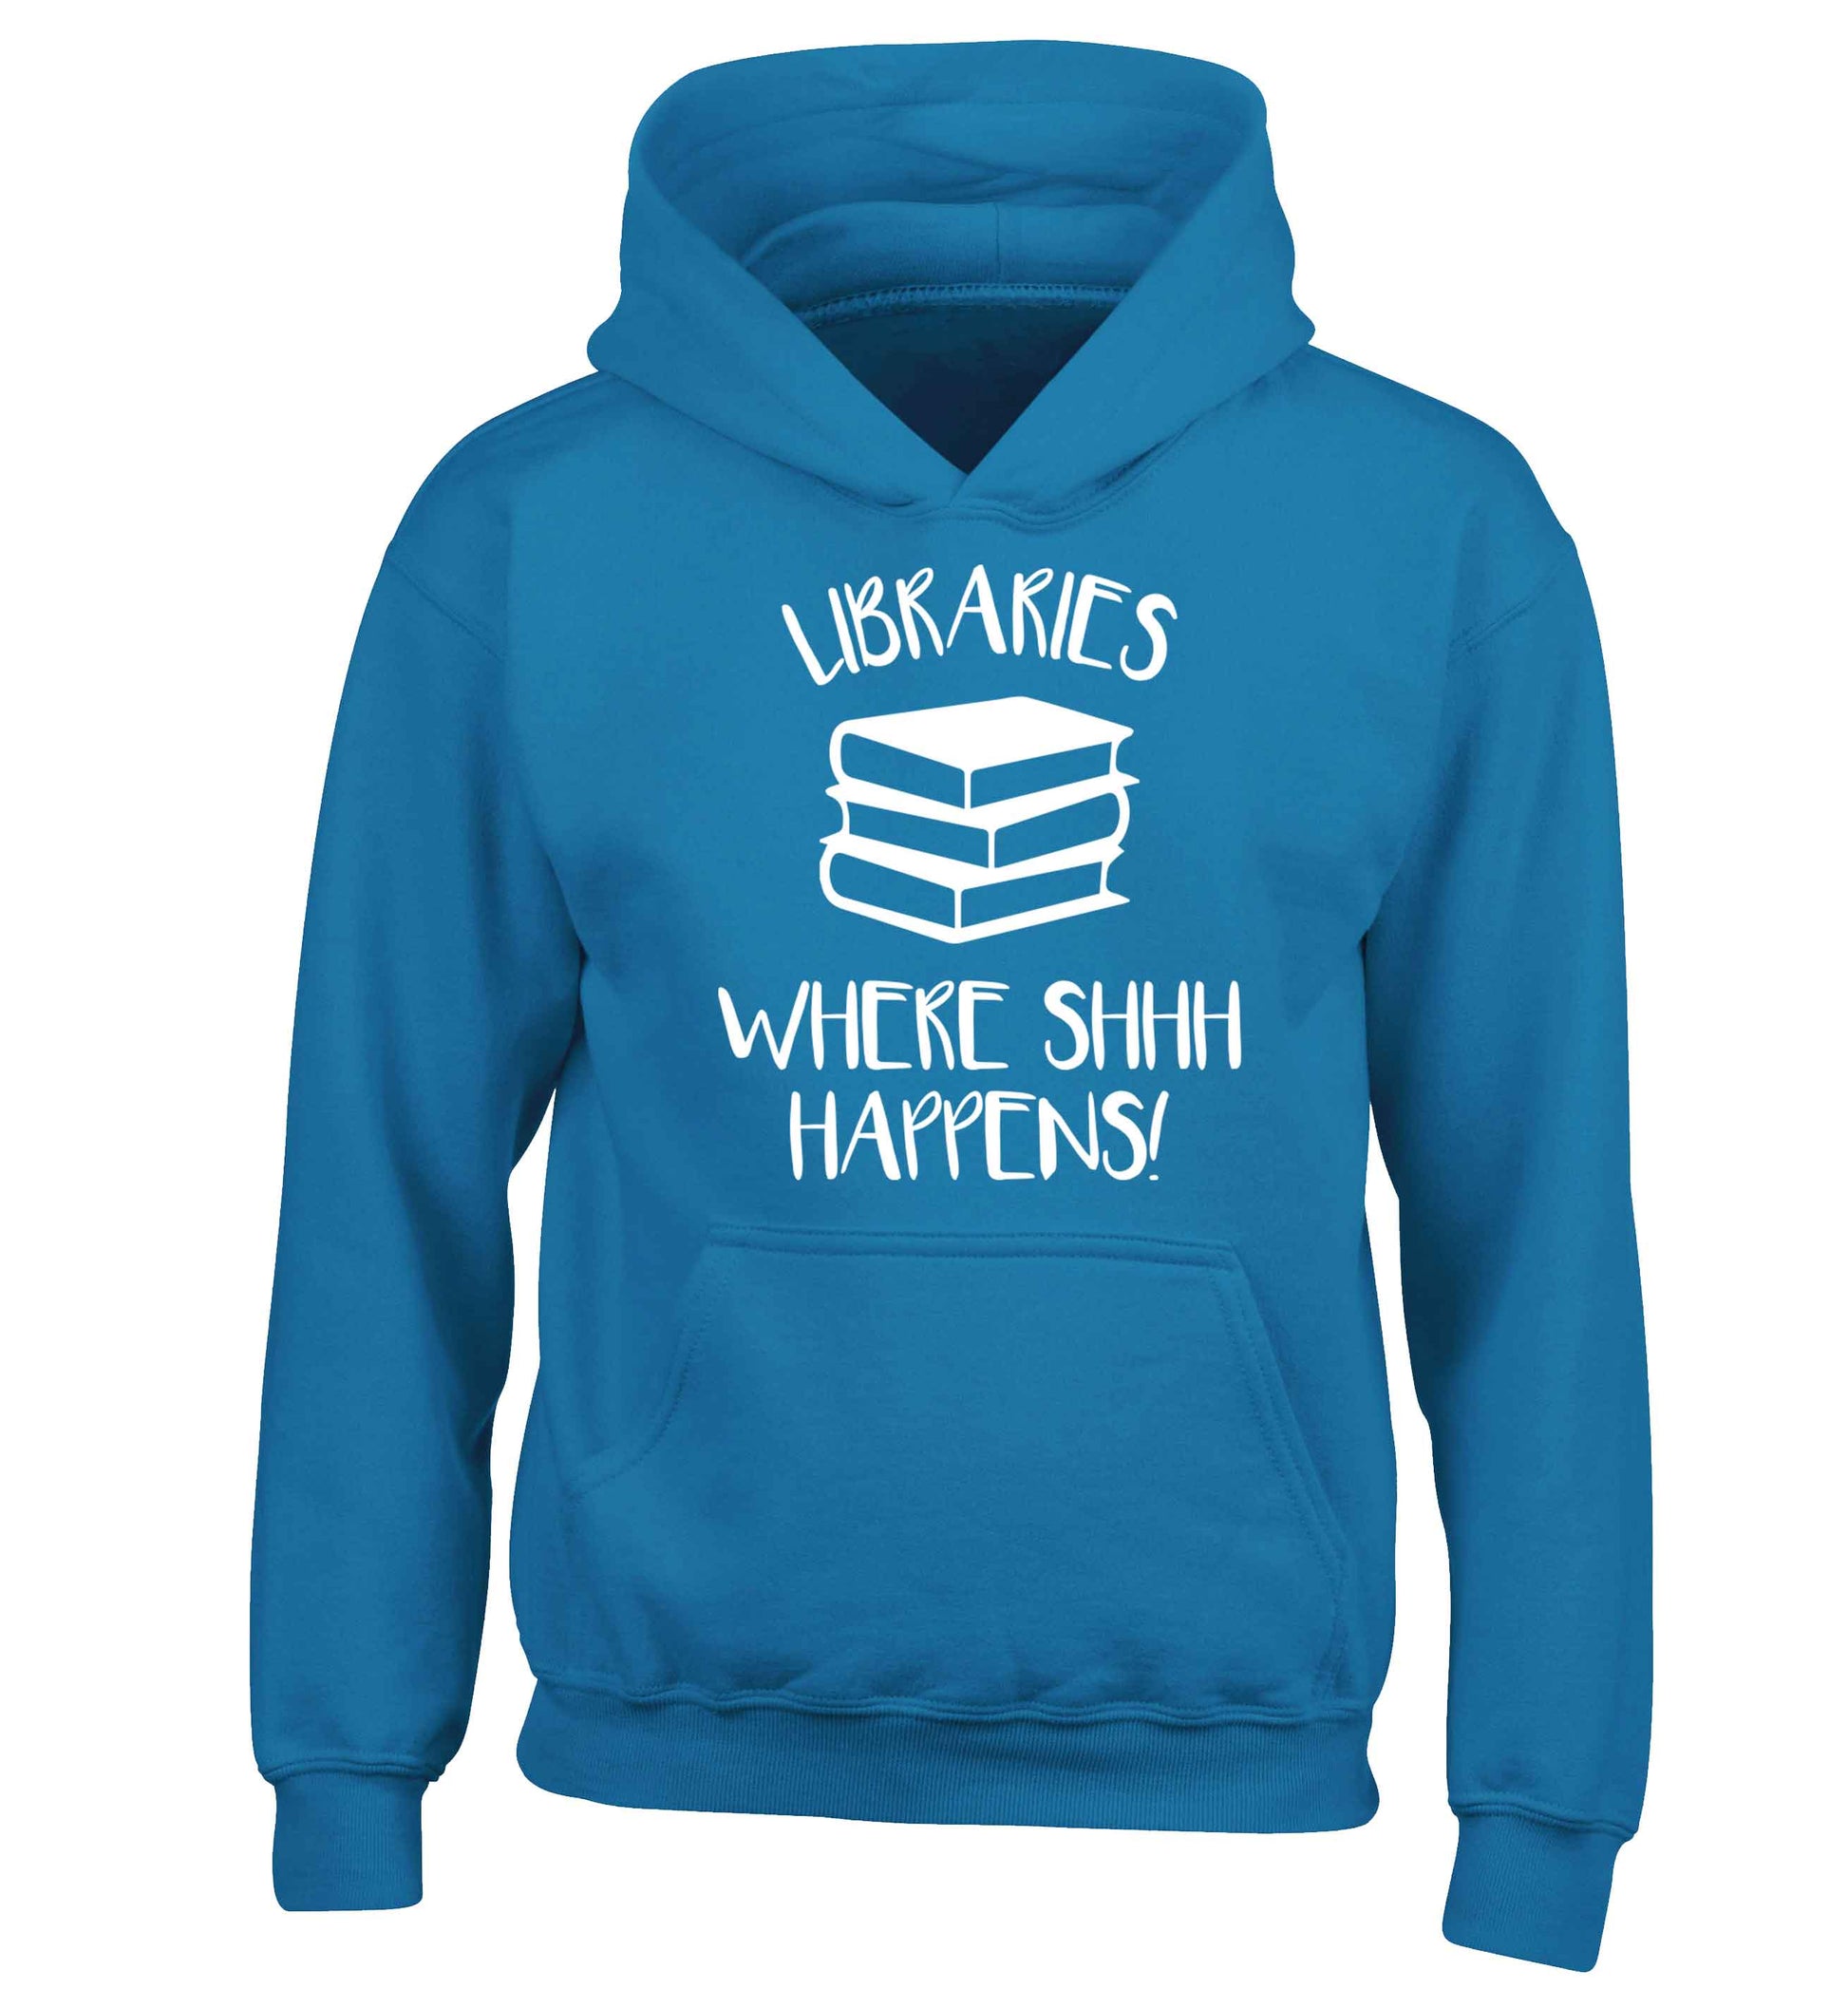 Libraries where shh happens! children's blue hoodie 12-13 Years